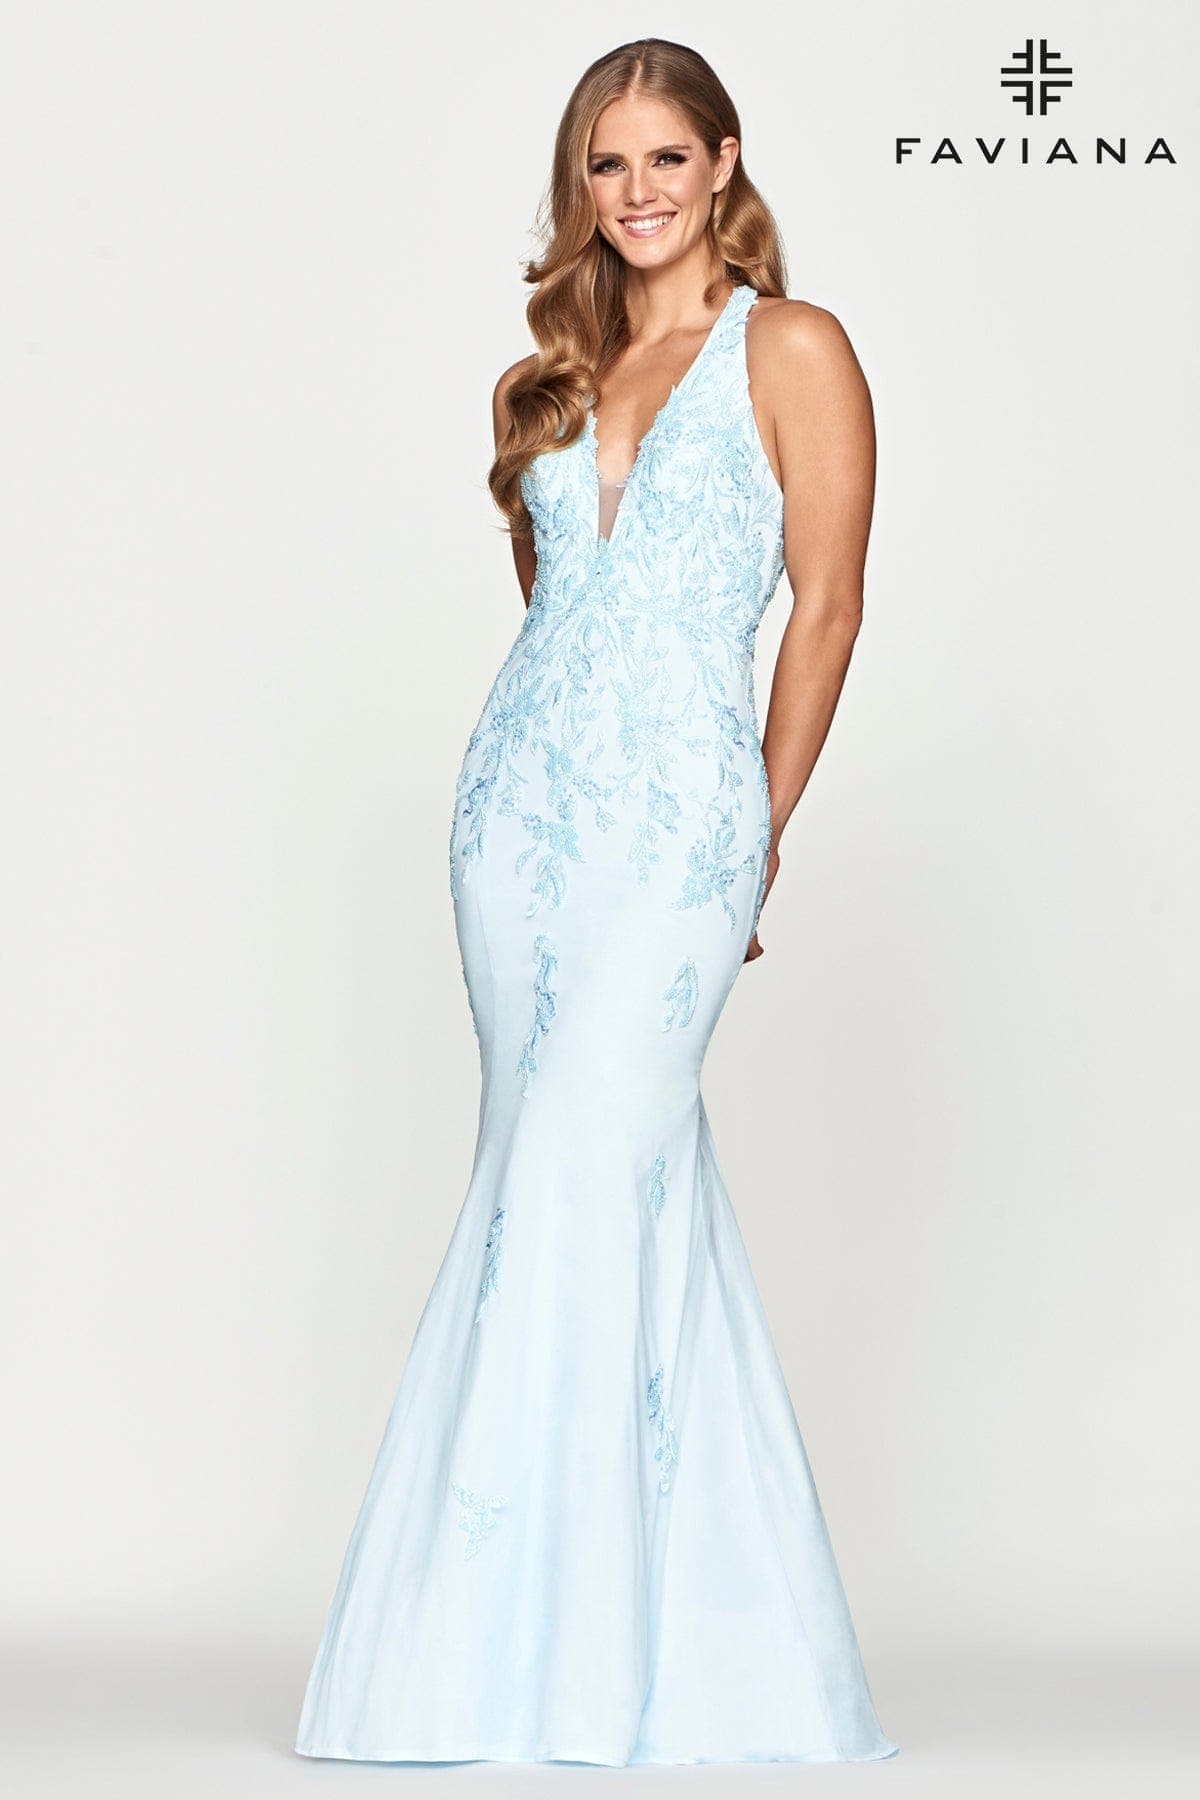 Long Beaded Formal Dress With Deep V Neck And Mermaid Skirt